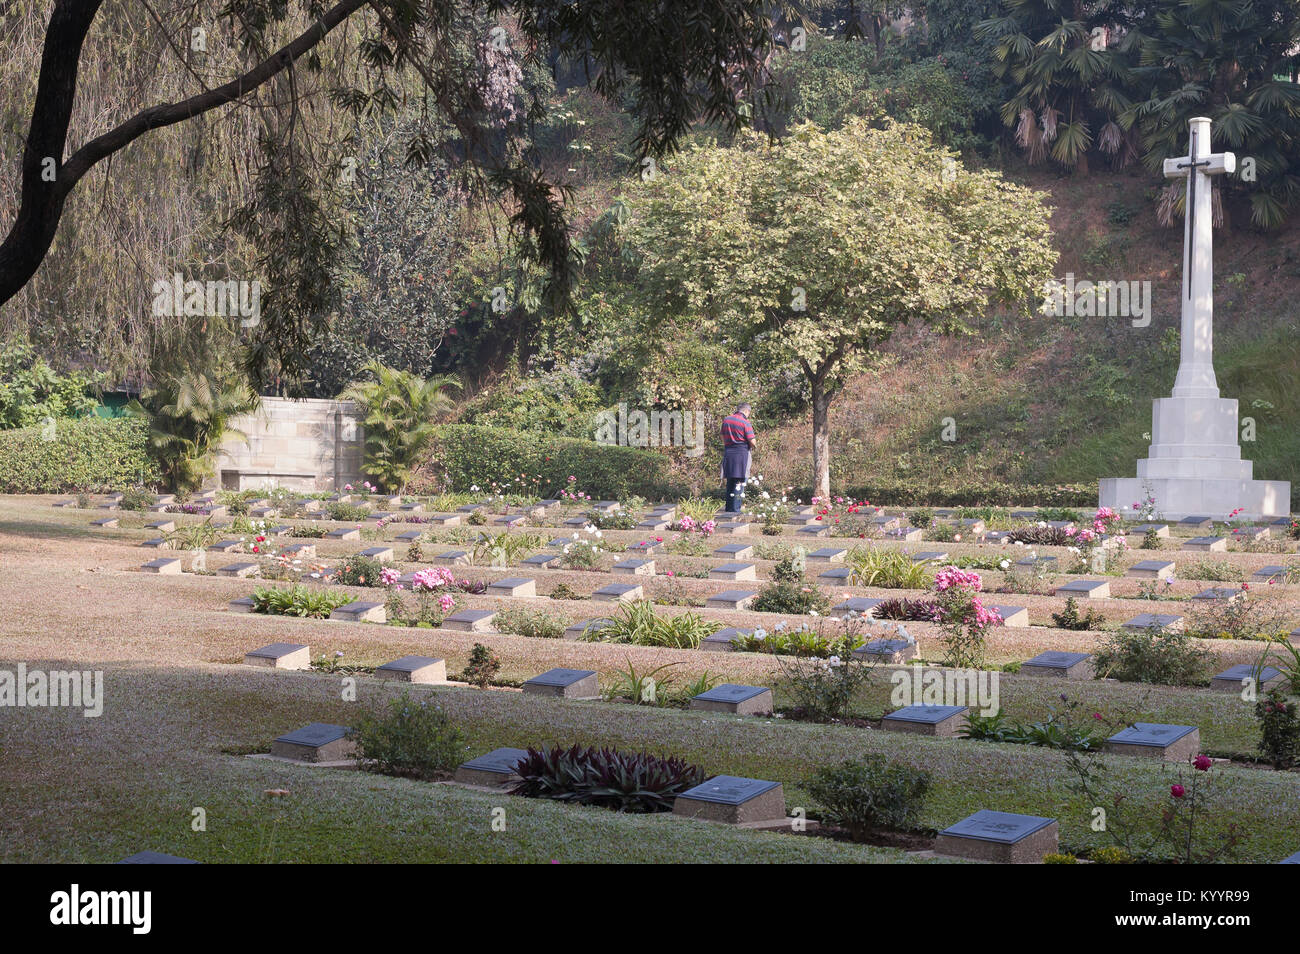 A visitor at the WWII cemetery in Guwahati, India. The war cemetery was set up during WWII for burial of servicemen killed in the war. Stock Photo